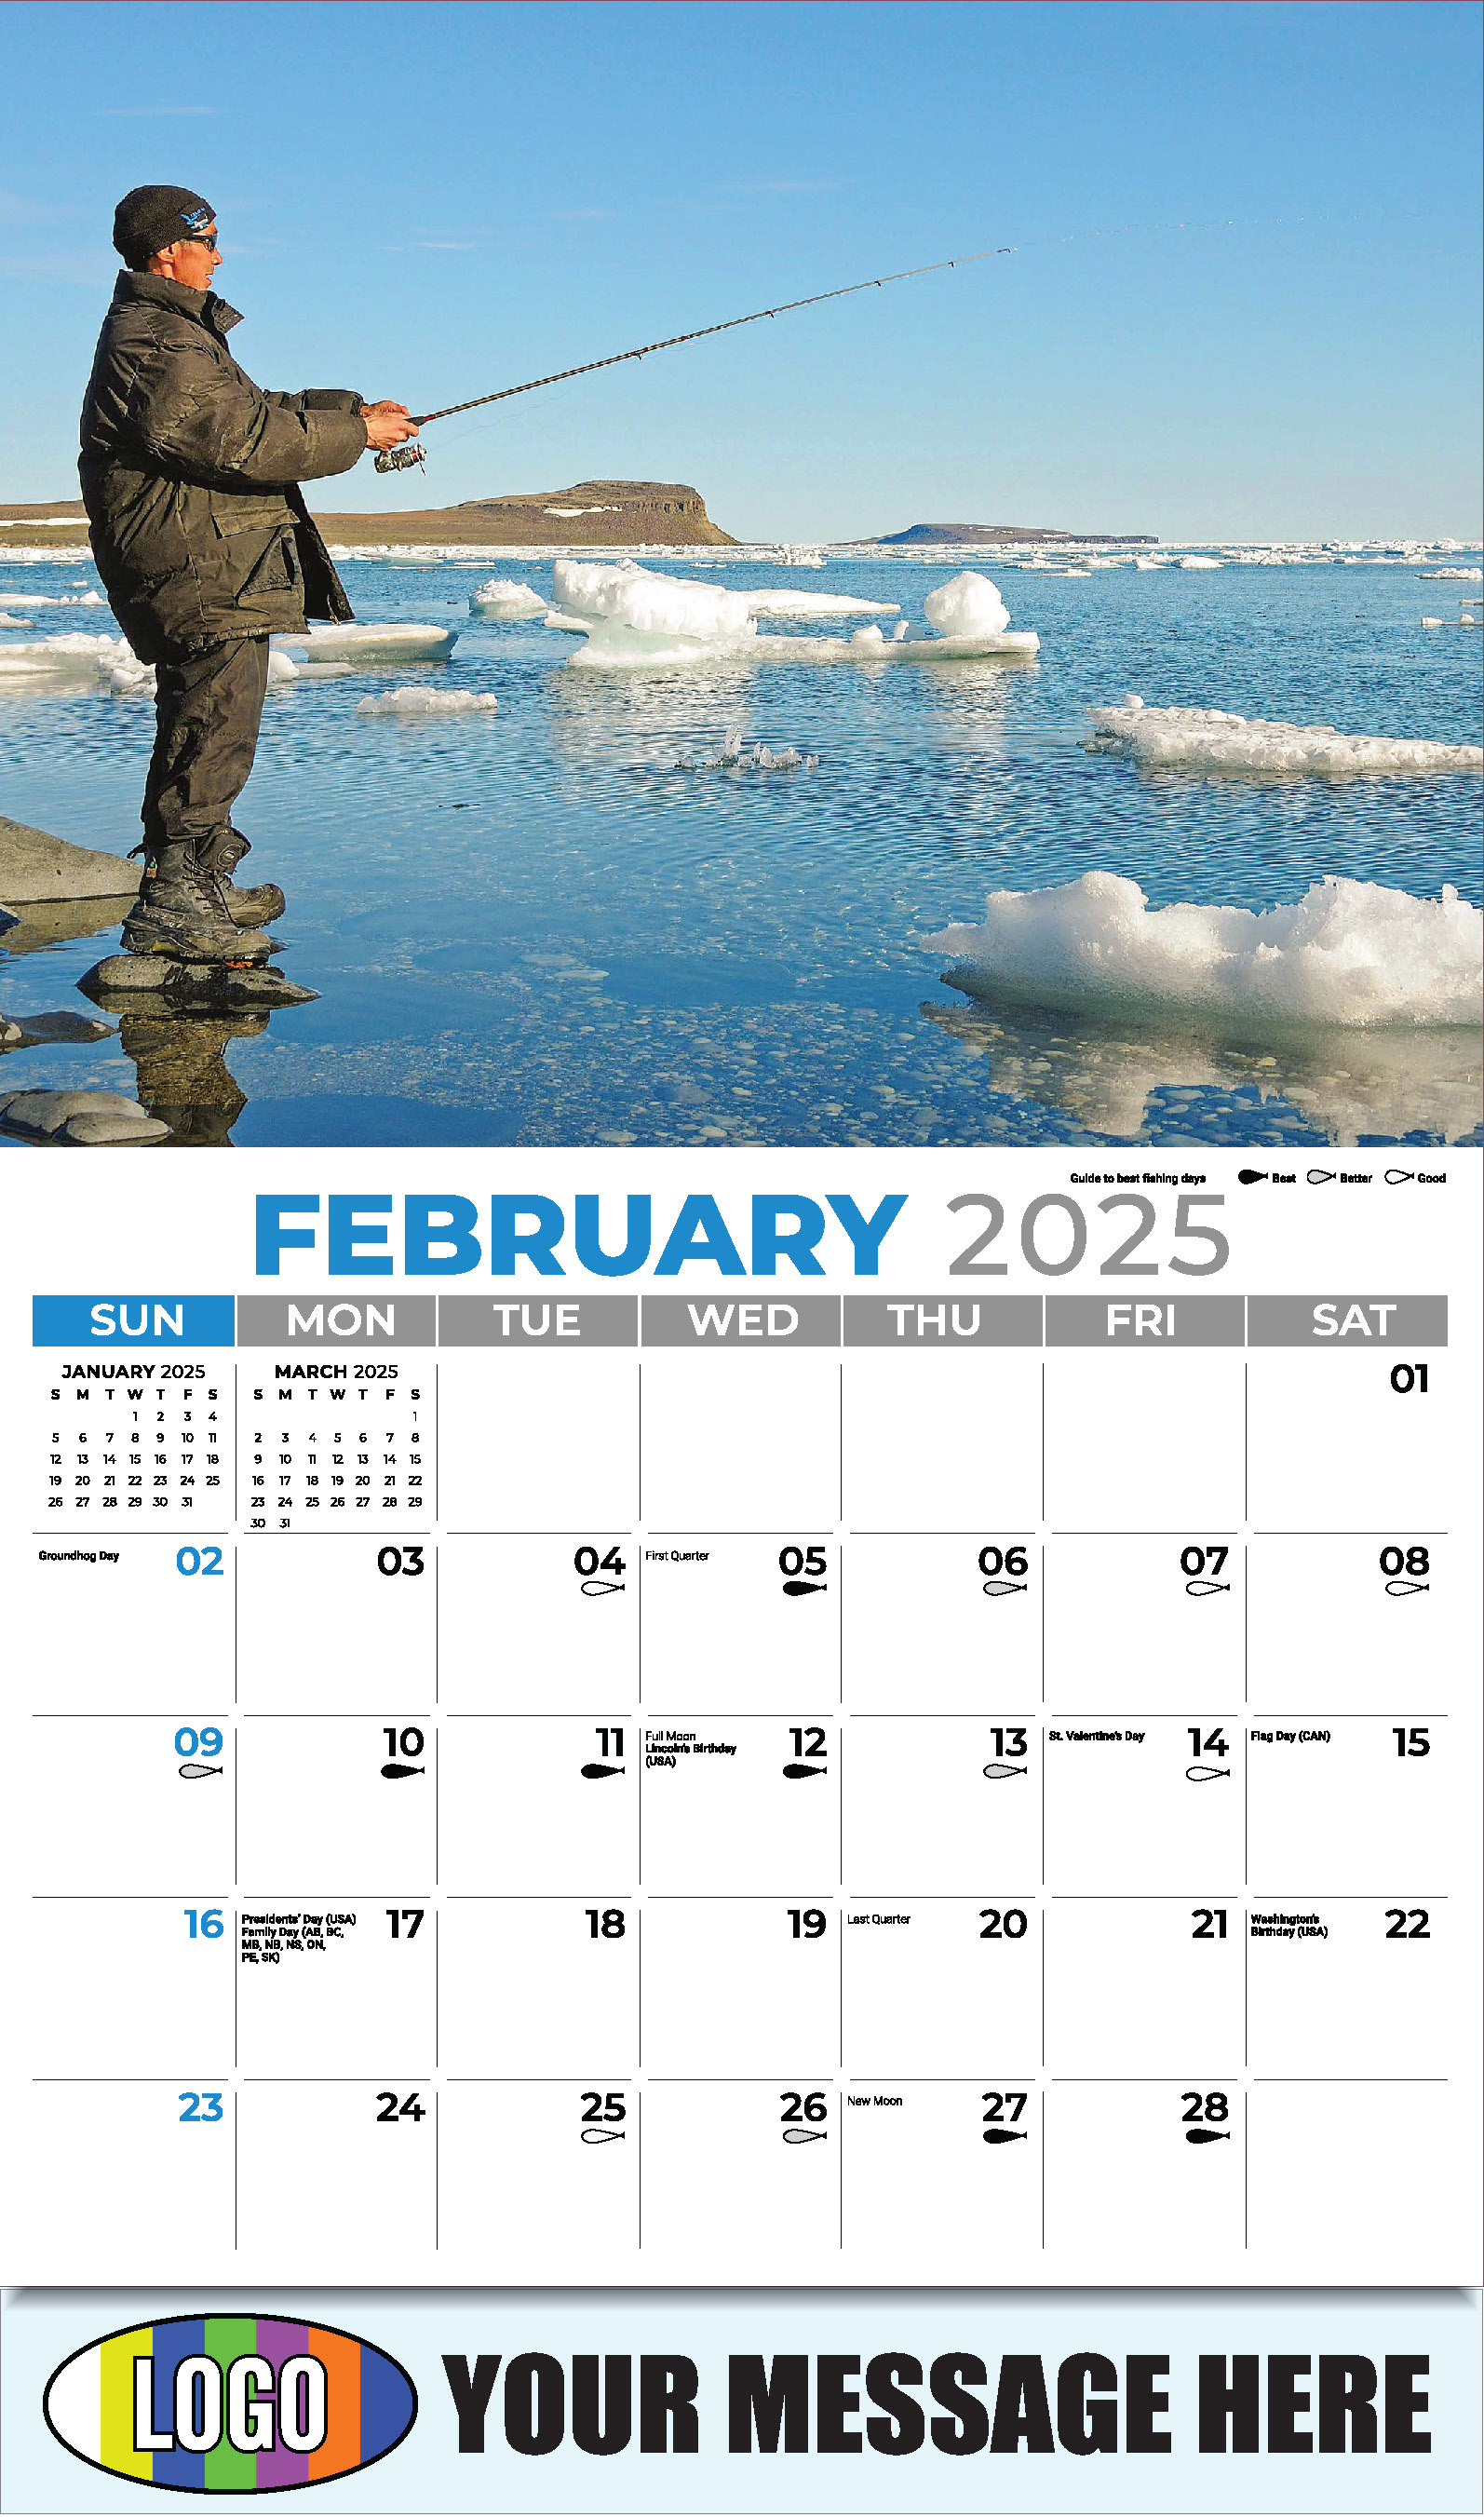 Fishing and Hunting 2025 Business Promotion Calendar - February